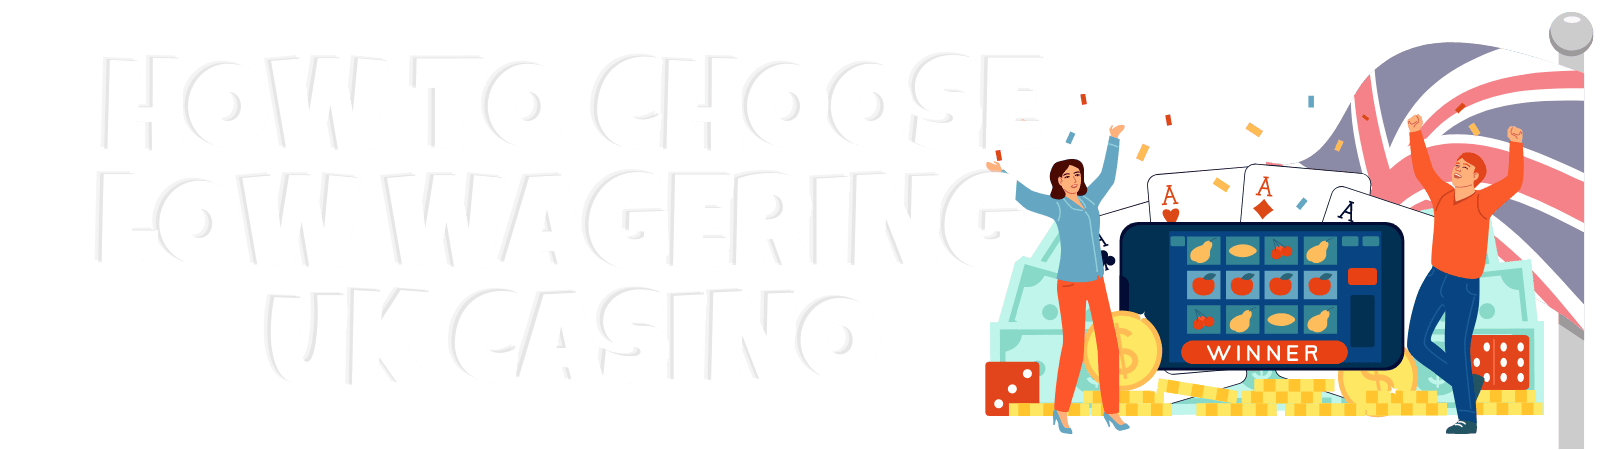 Things to Consider when Choosing a Low Wagering UK Casino img